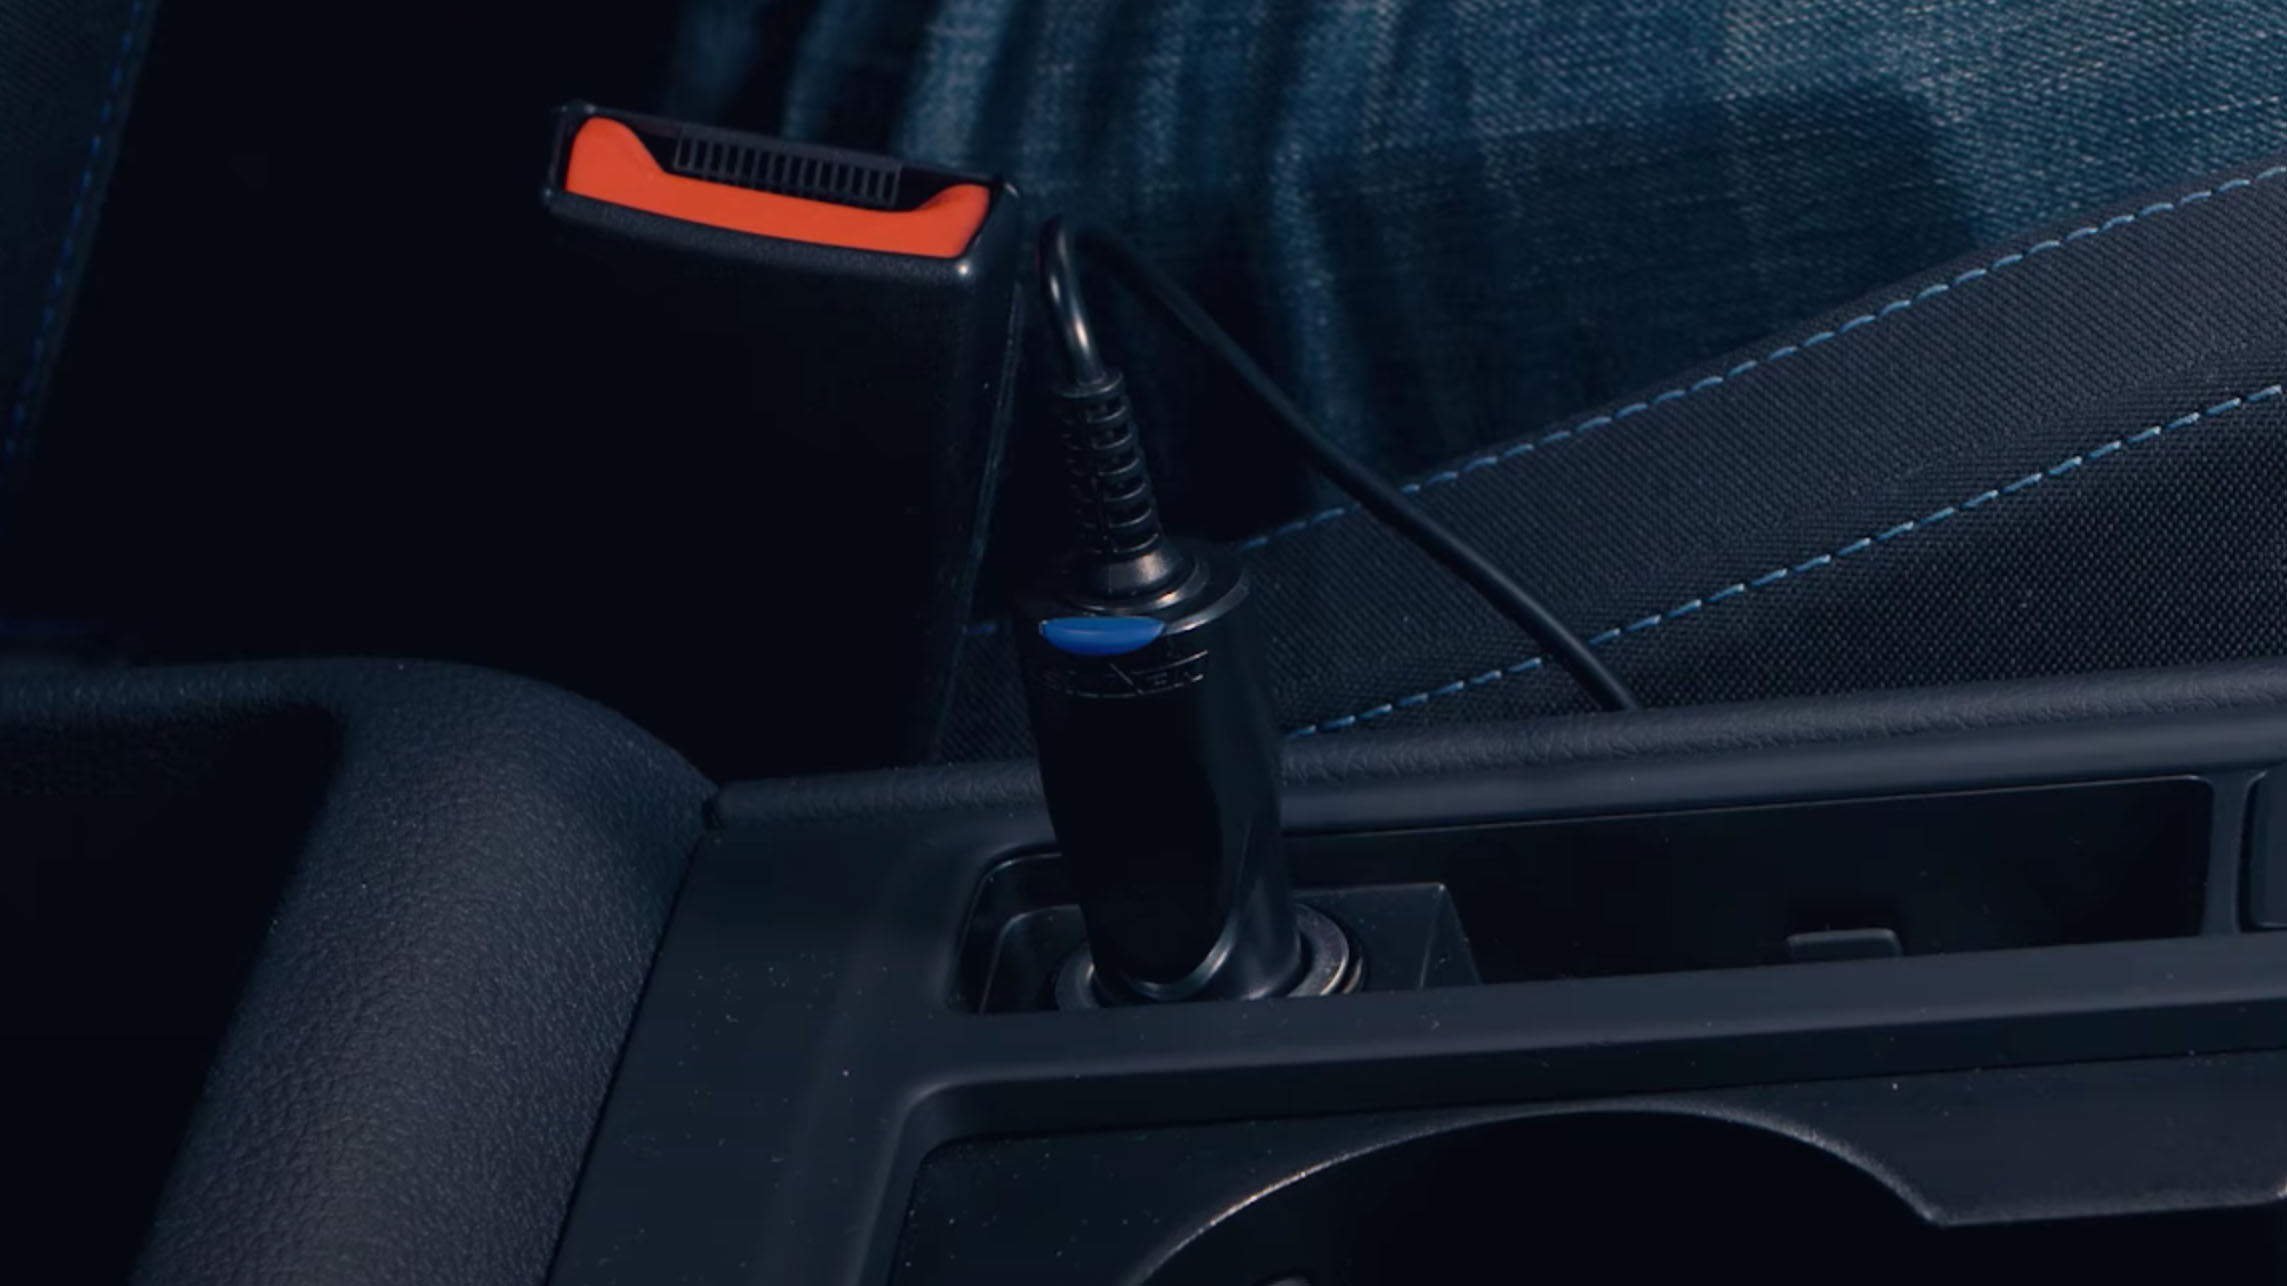 Some hands installing the a dash cam cable inside a car